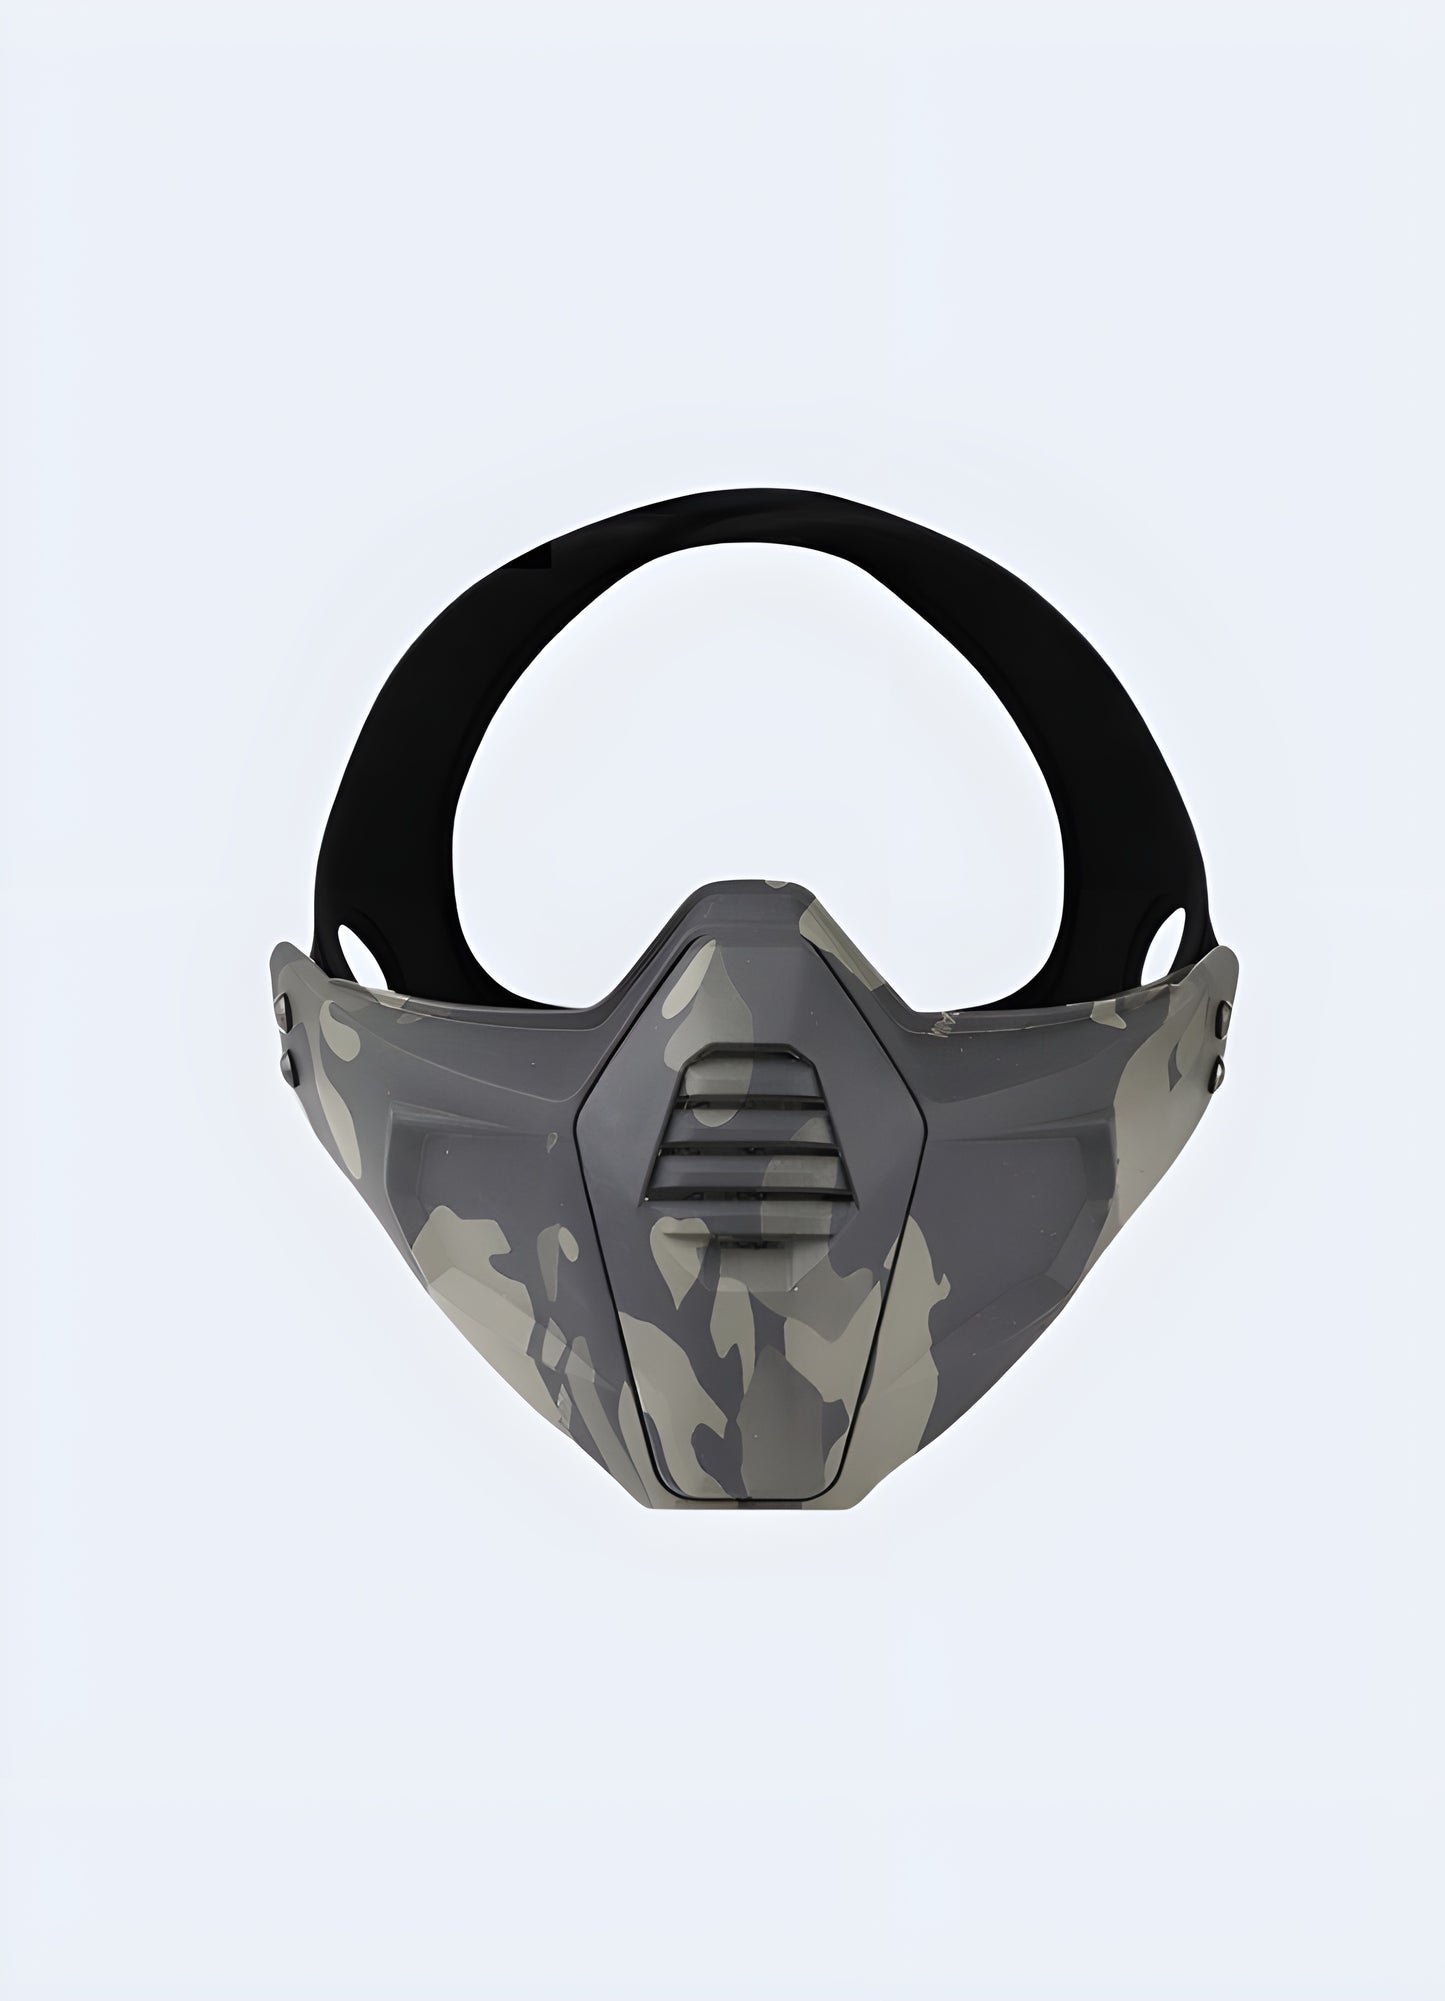 Maintain anonymity while commanding attention with the mask's menacing visuals. 